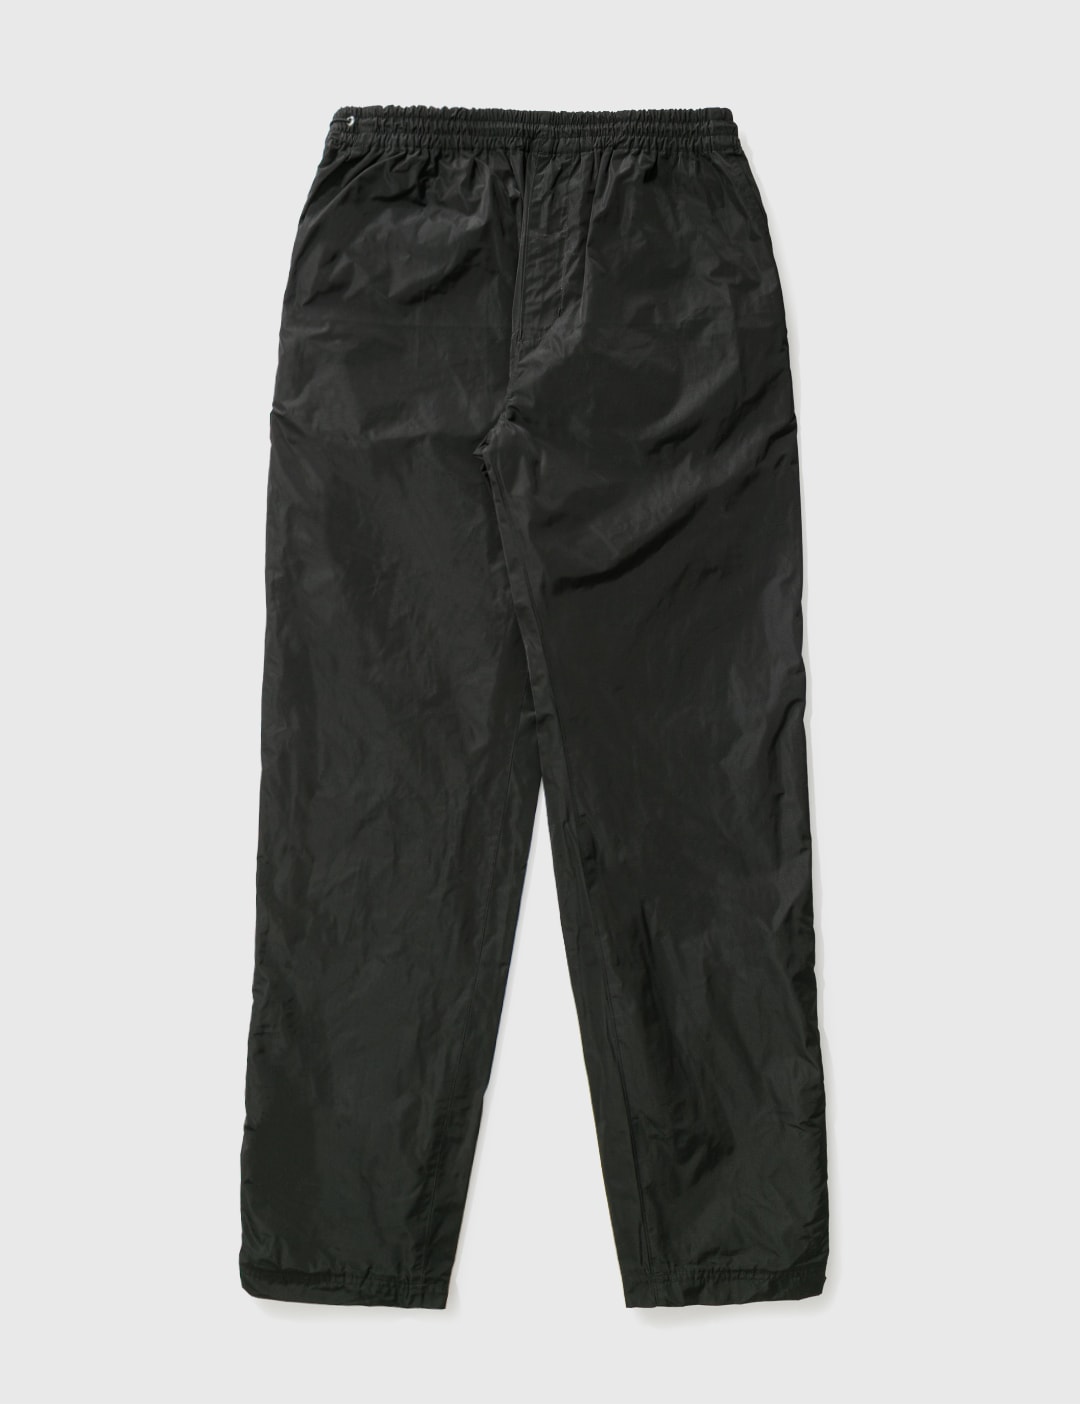 White Mountaineering Black Jogger Pants Placeholder Image